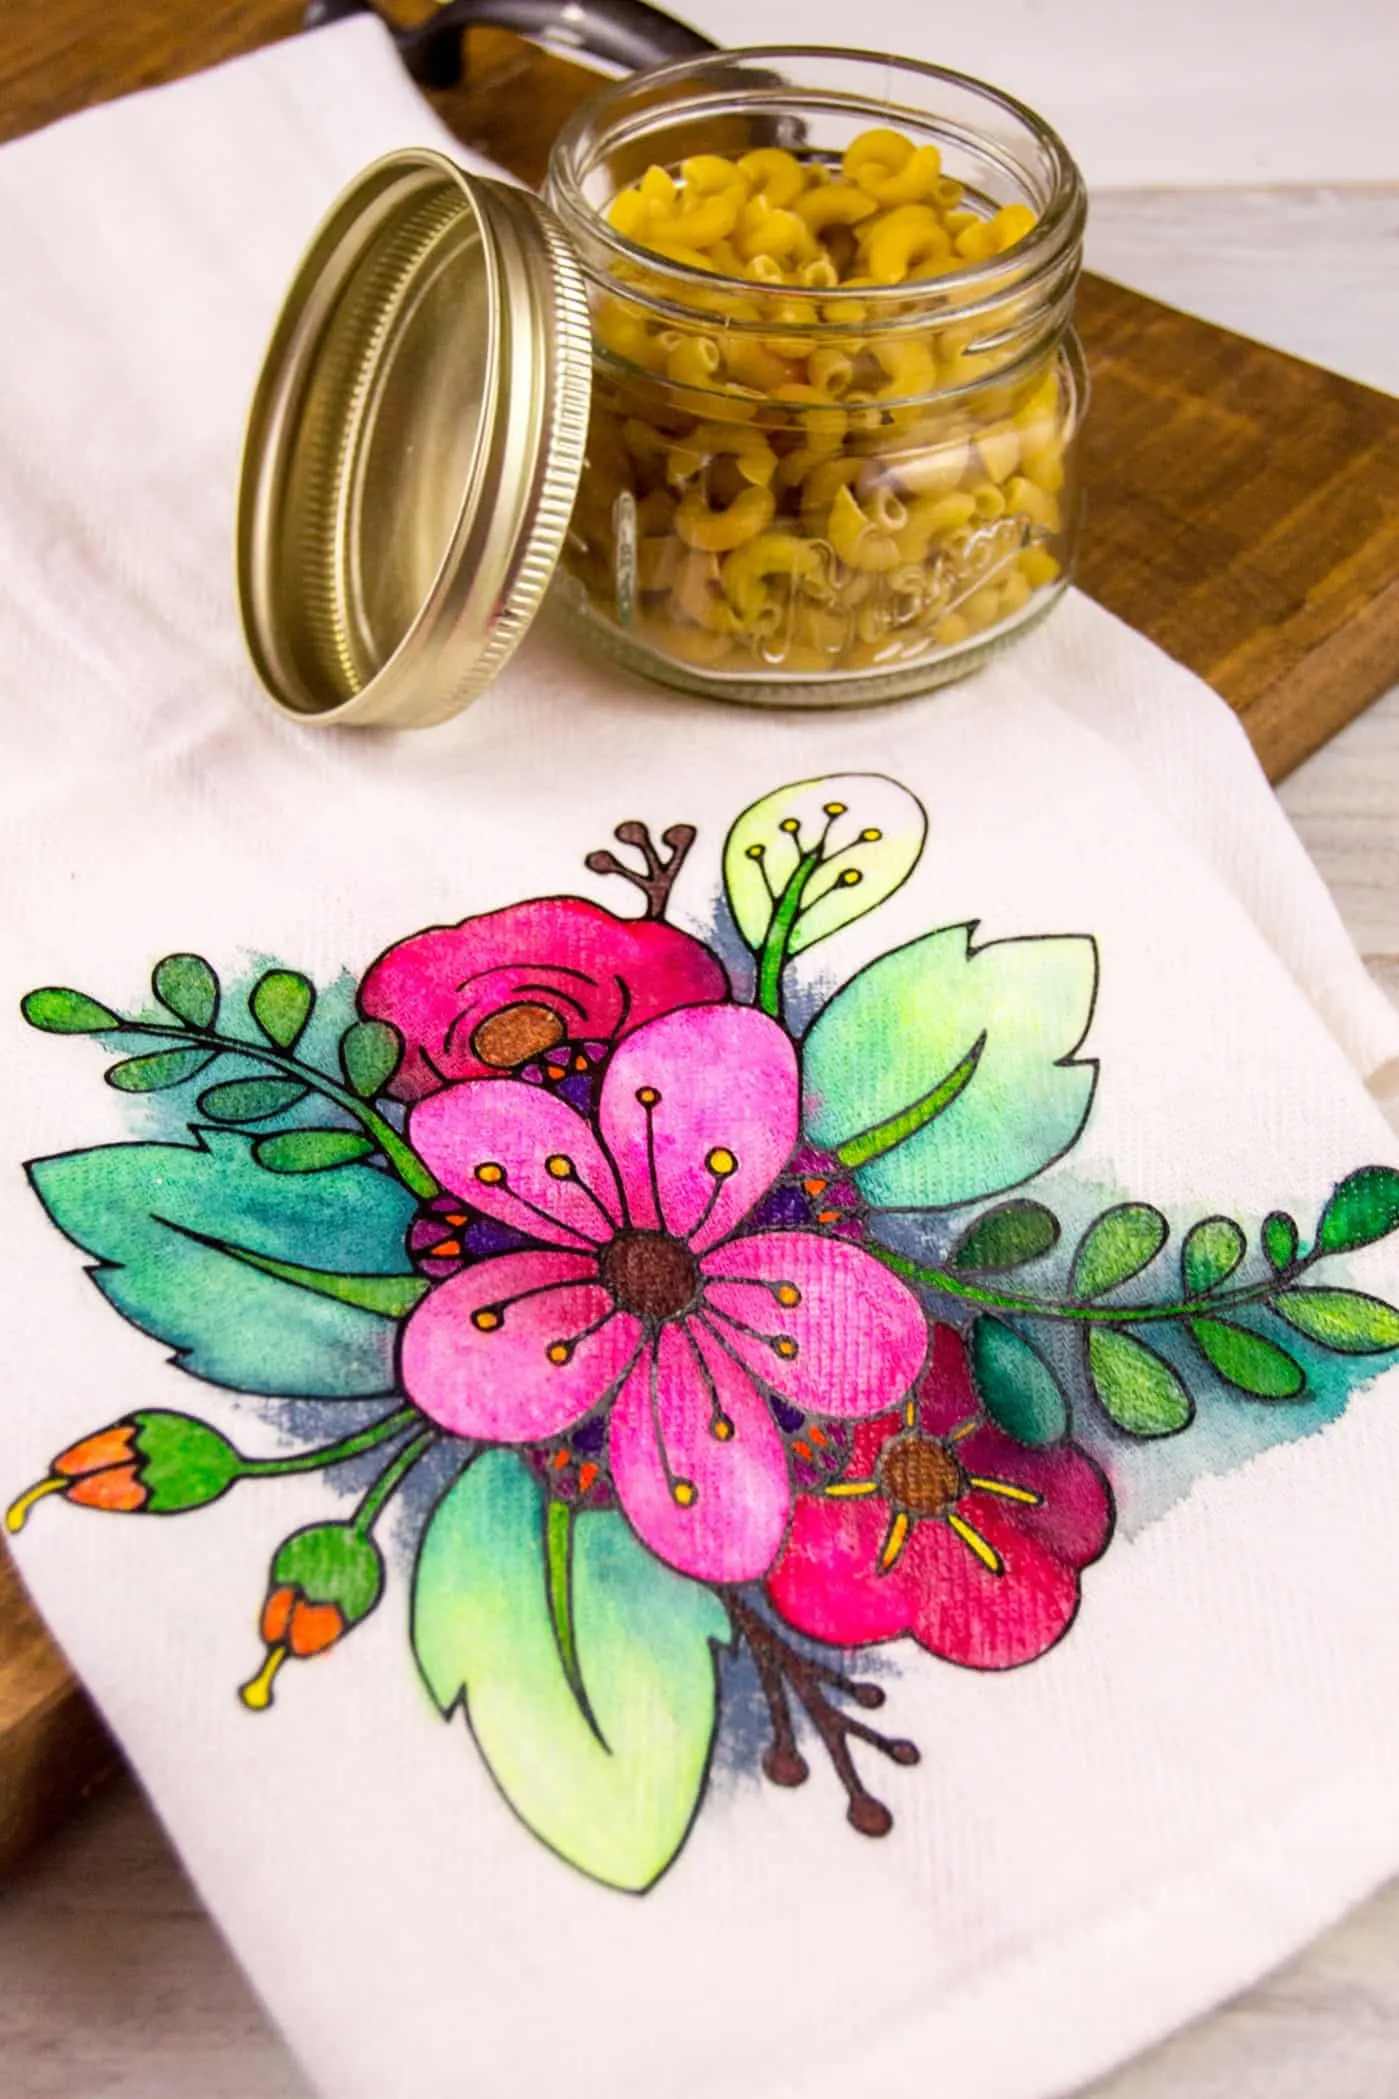 DIY tea towel decorated with fabric markers